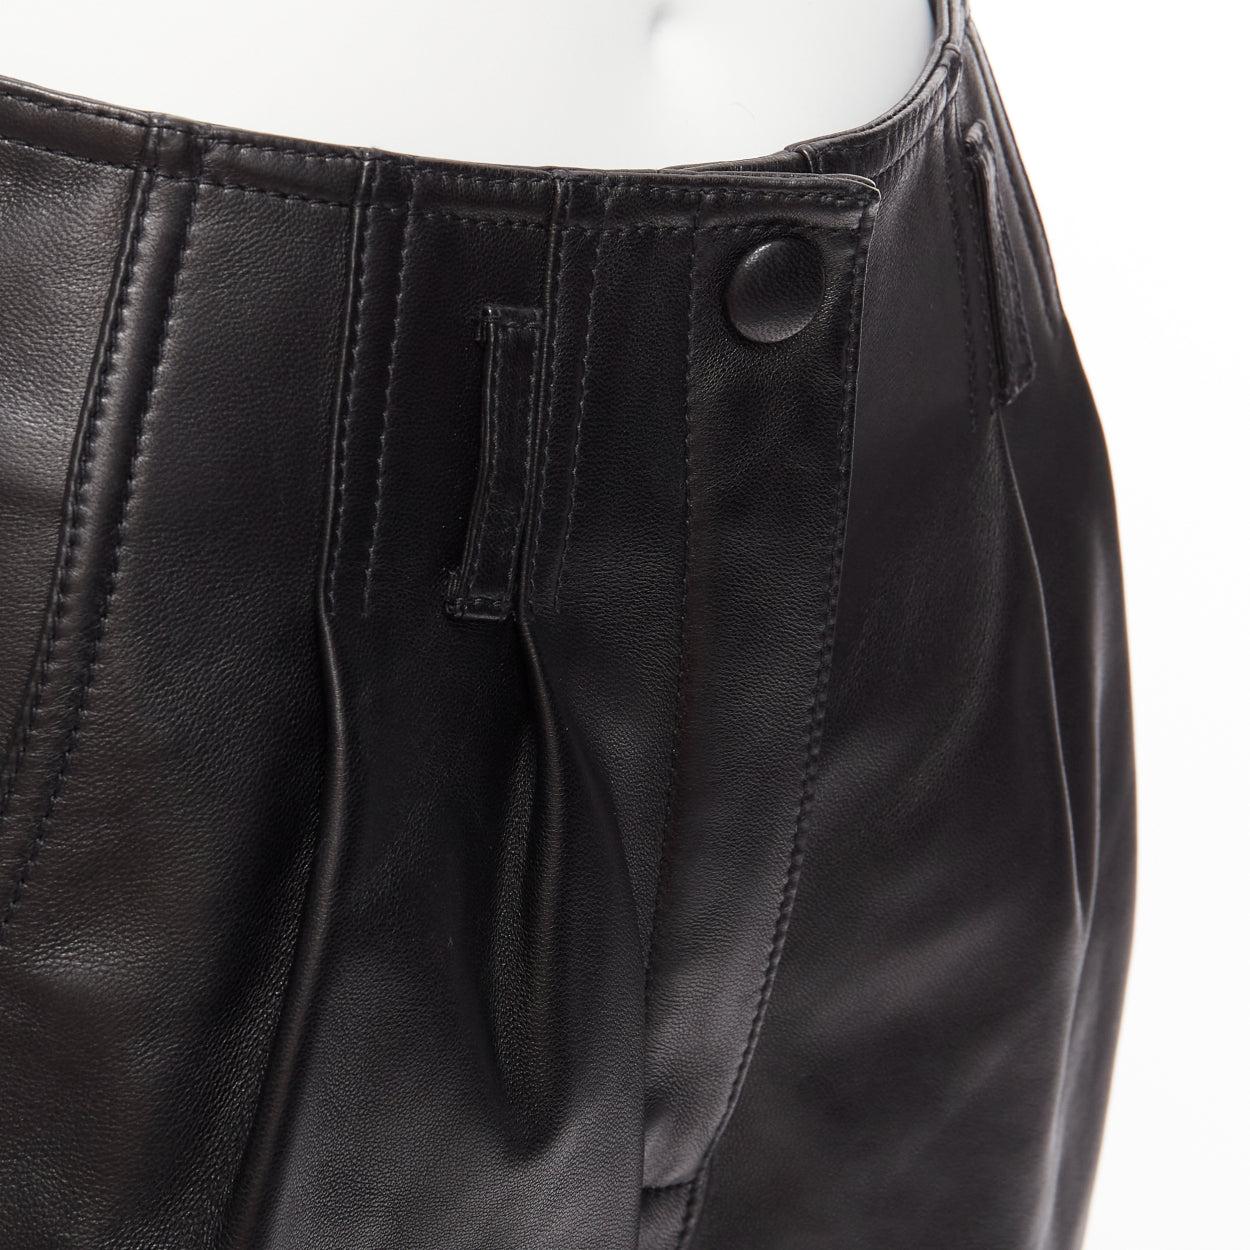 SAINT LAURENT 2020 black lambskin leather high waist pleated wide shorts FR34 XS
Reference: AAWC/A00877
Brand: Saint Laurent
Designer: Anthony Vaccarello
Collection: 2020
Material: Lambskin Leather
Color: Black
Pattern: Solid
Closure: Zip